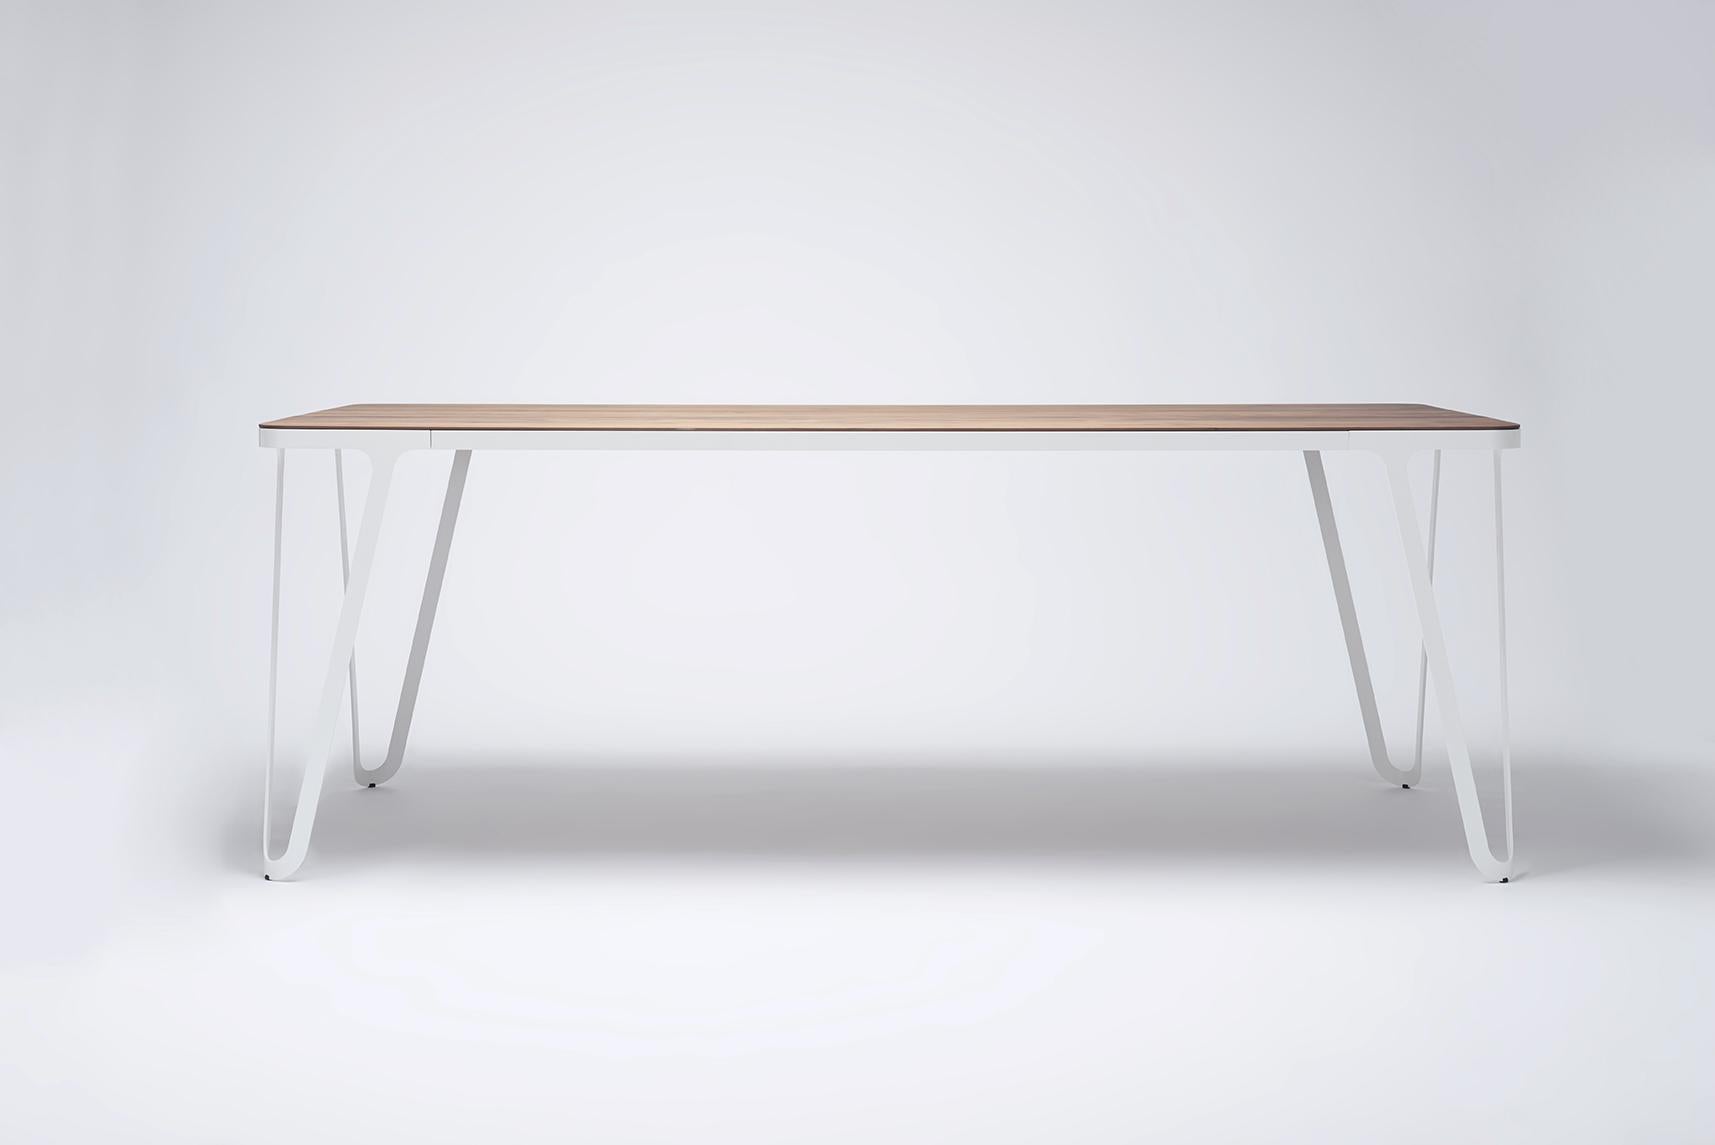 Loop Table 160 Walnut by Sebastian Scherer
Dimensions: D160 x W90 x H74 cm
Materials: Walnut, Aluminium, Wood
Weight: 47.1 kg
Also Available: Colours:Solid wood (matt lacquered or oiled): black and white stained ash / natural oak / american